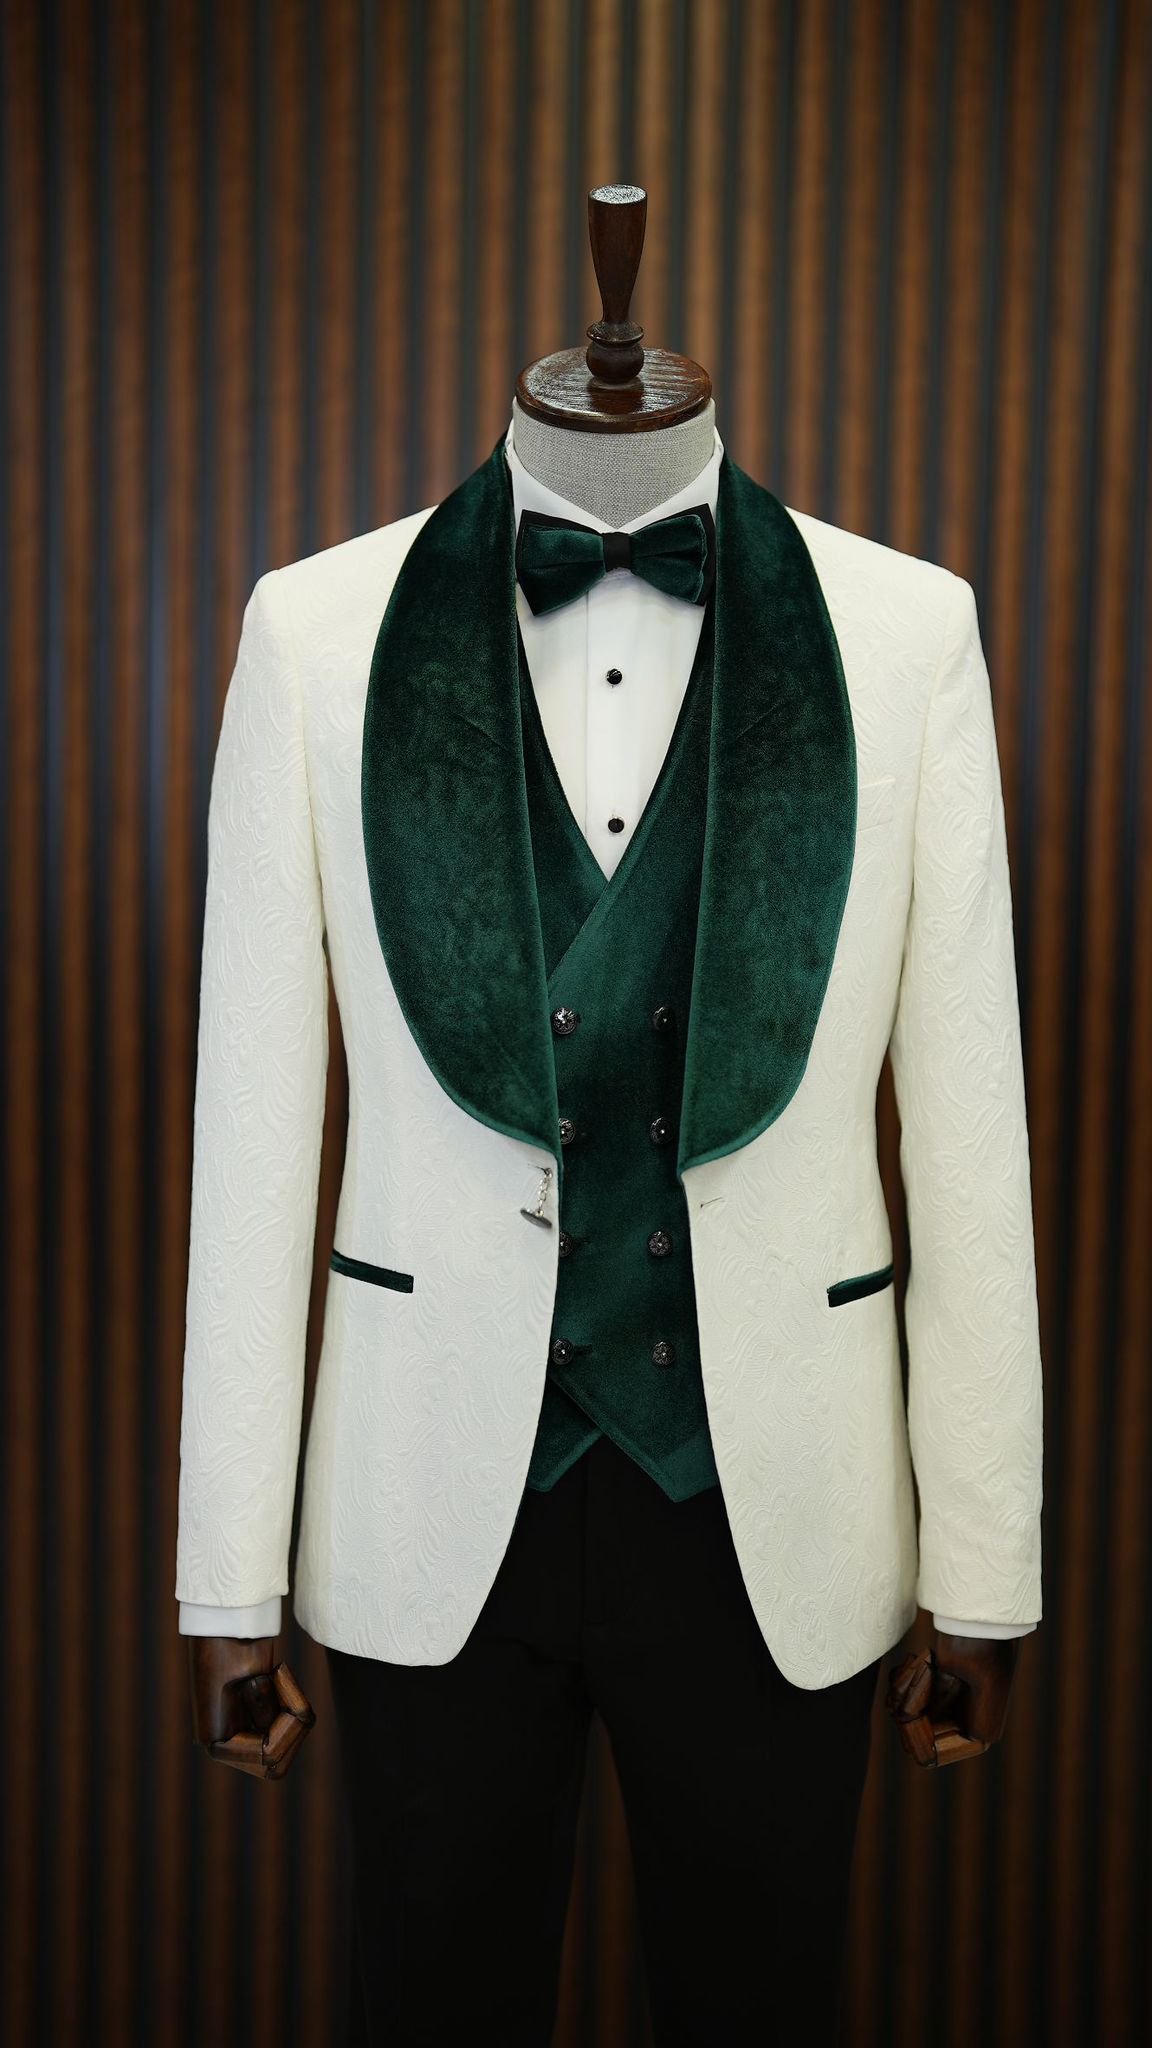 A Green and White Tuxedo Suit on display.